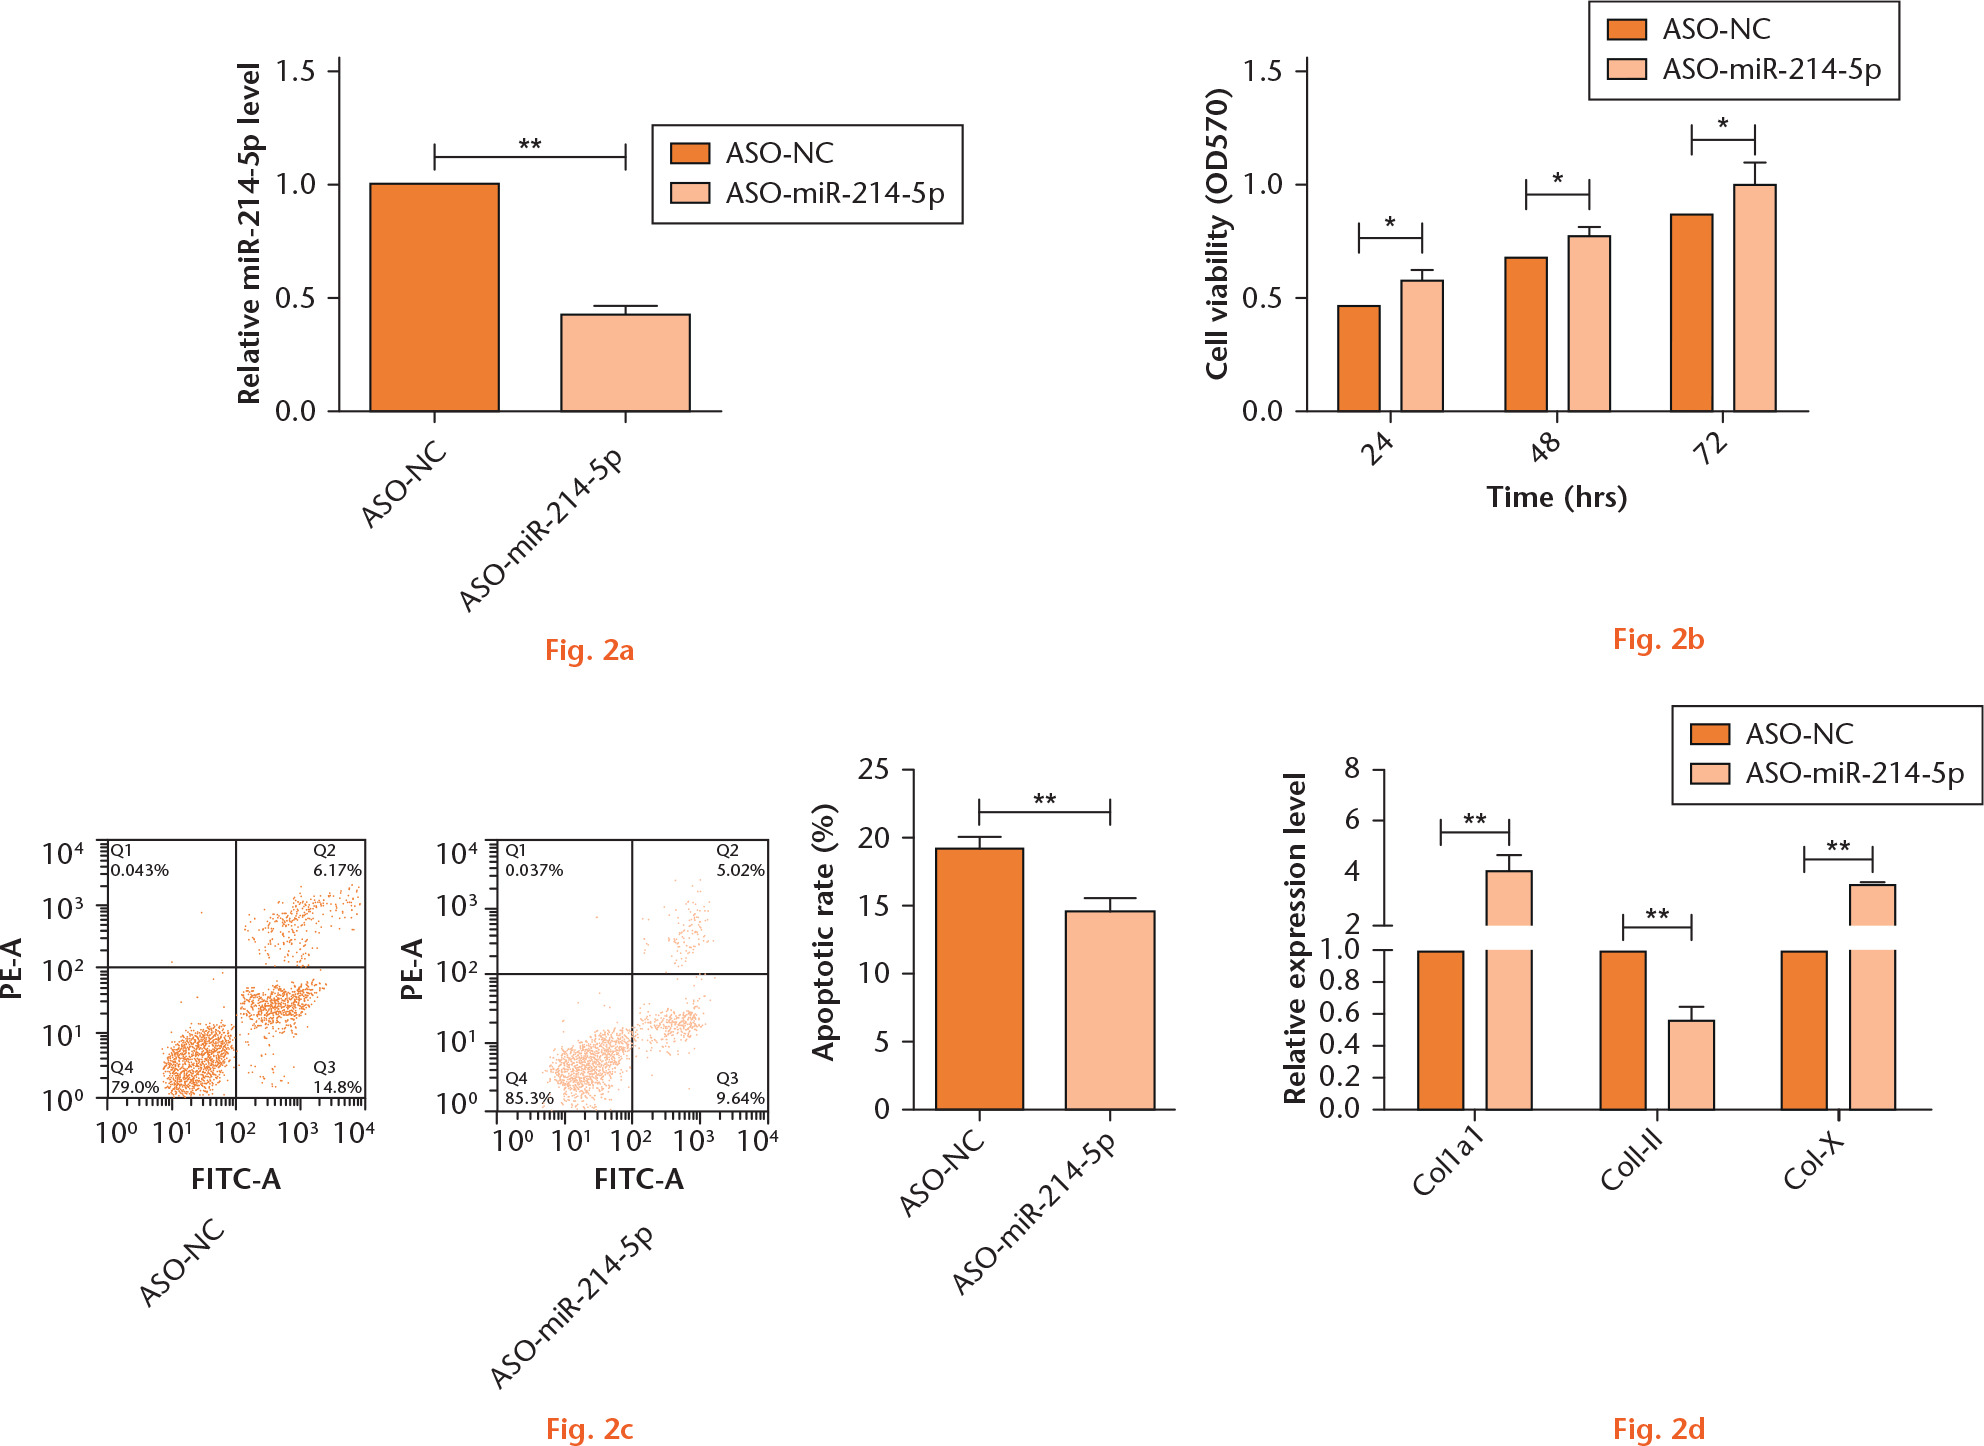  
            Inhibition of miR-214-5p promotes cell viability, suppresses apoptosis, and changes collagen (COL) levels. a) Relative expression of miR-214-5p after transfection with ASO-miR-214-5p; b) effects of inhibition of miR-214-5p on cell viability; c) effects of inhibition of miR-214-5p on cell apoptosis; d) effects of inhibition of miR-214-5p on the expression of COL1A1, COL-II, and COL-X. *p < 0.05, **p < 0.01 compared with ASO-NC.
          